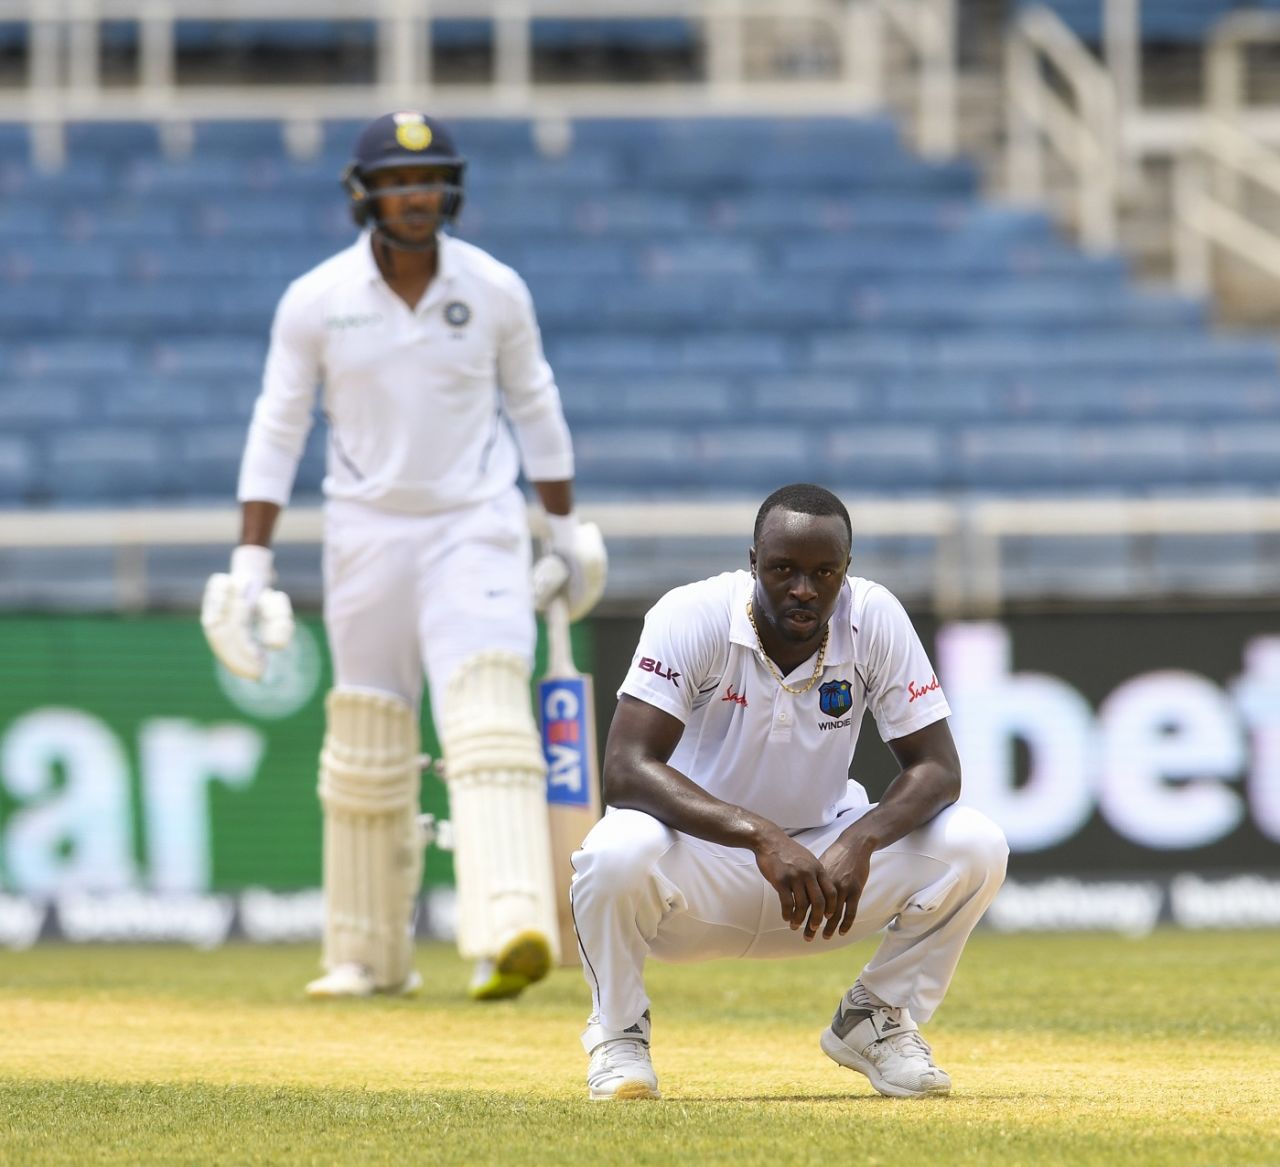 Kemar Roach reacts with relief after getting Mayank Agarwal out lbw, West Indies v India, 2nd Test, Kingston, September 1, 2019